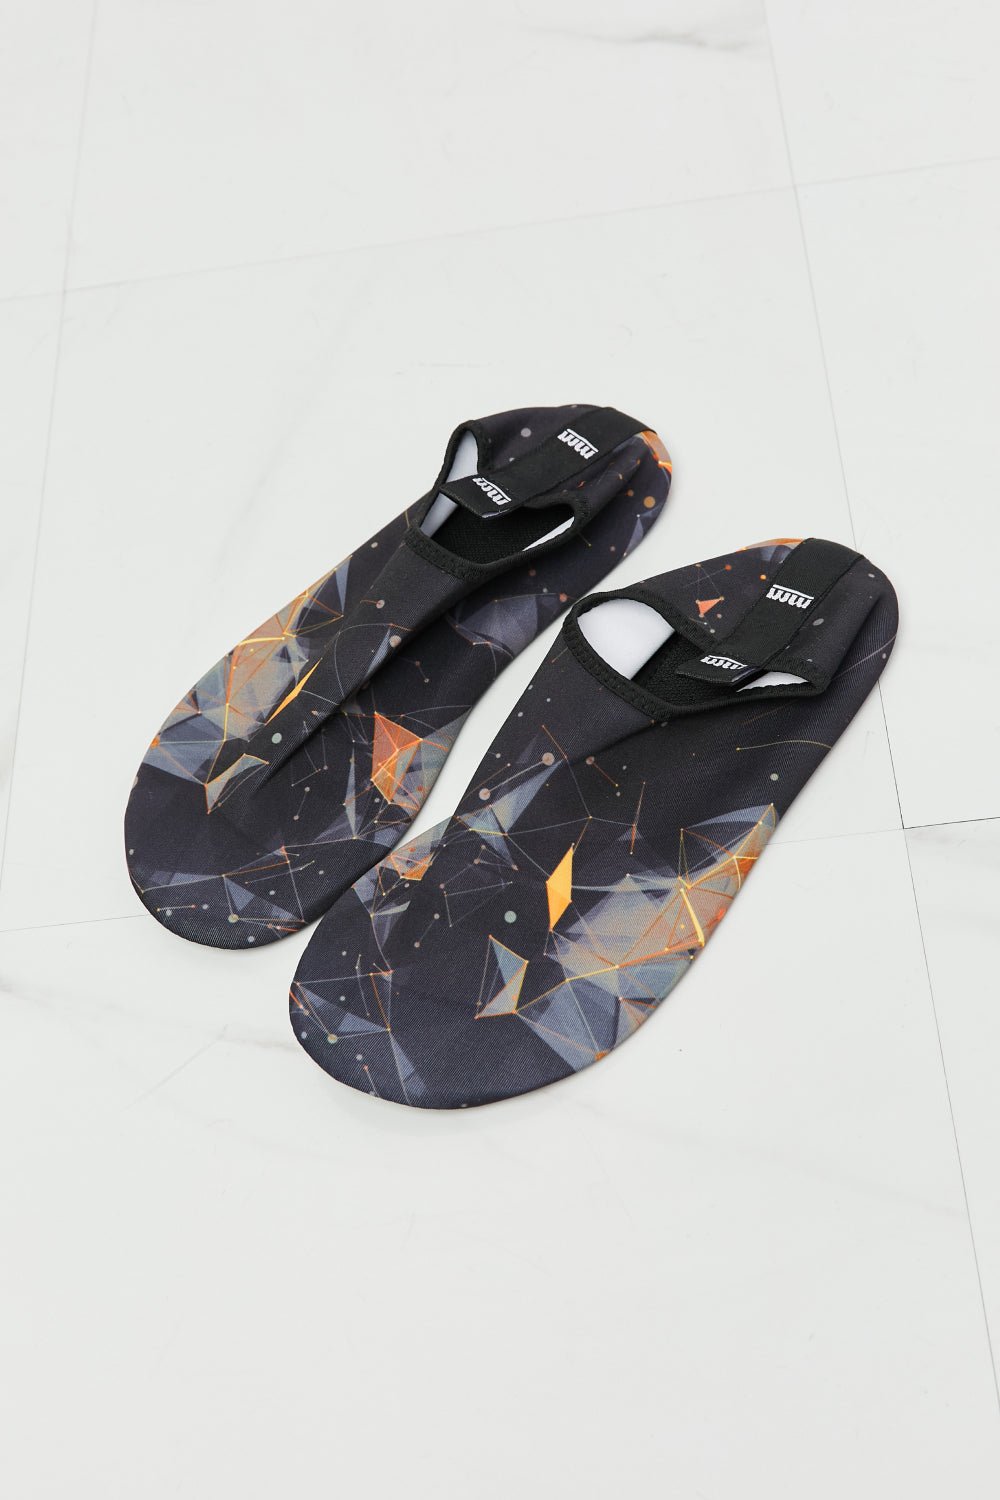 MMshoes On The Shore Water Shoes in Black/Orange - pvmark